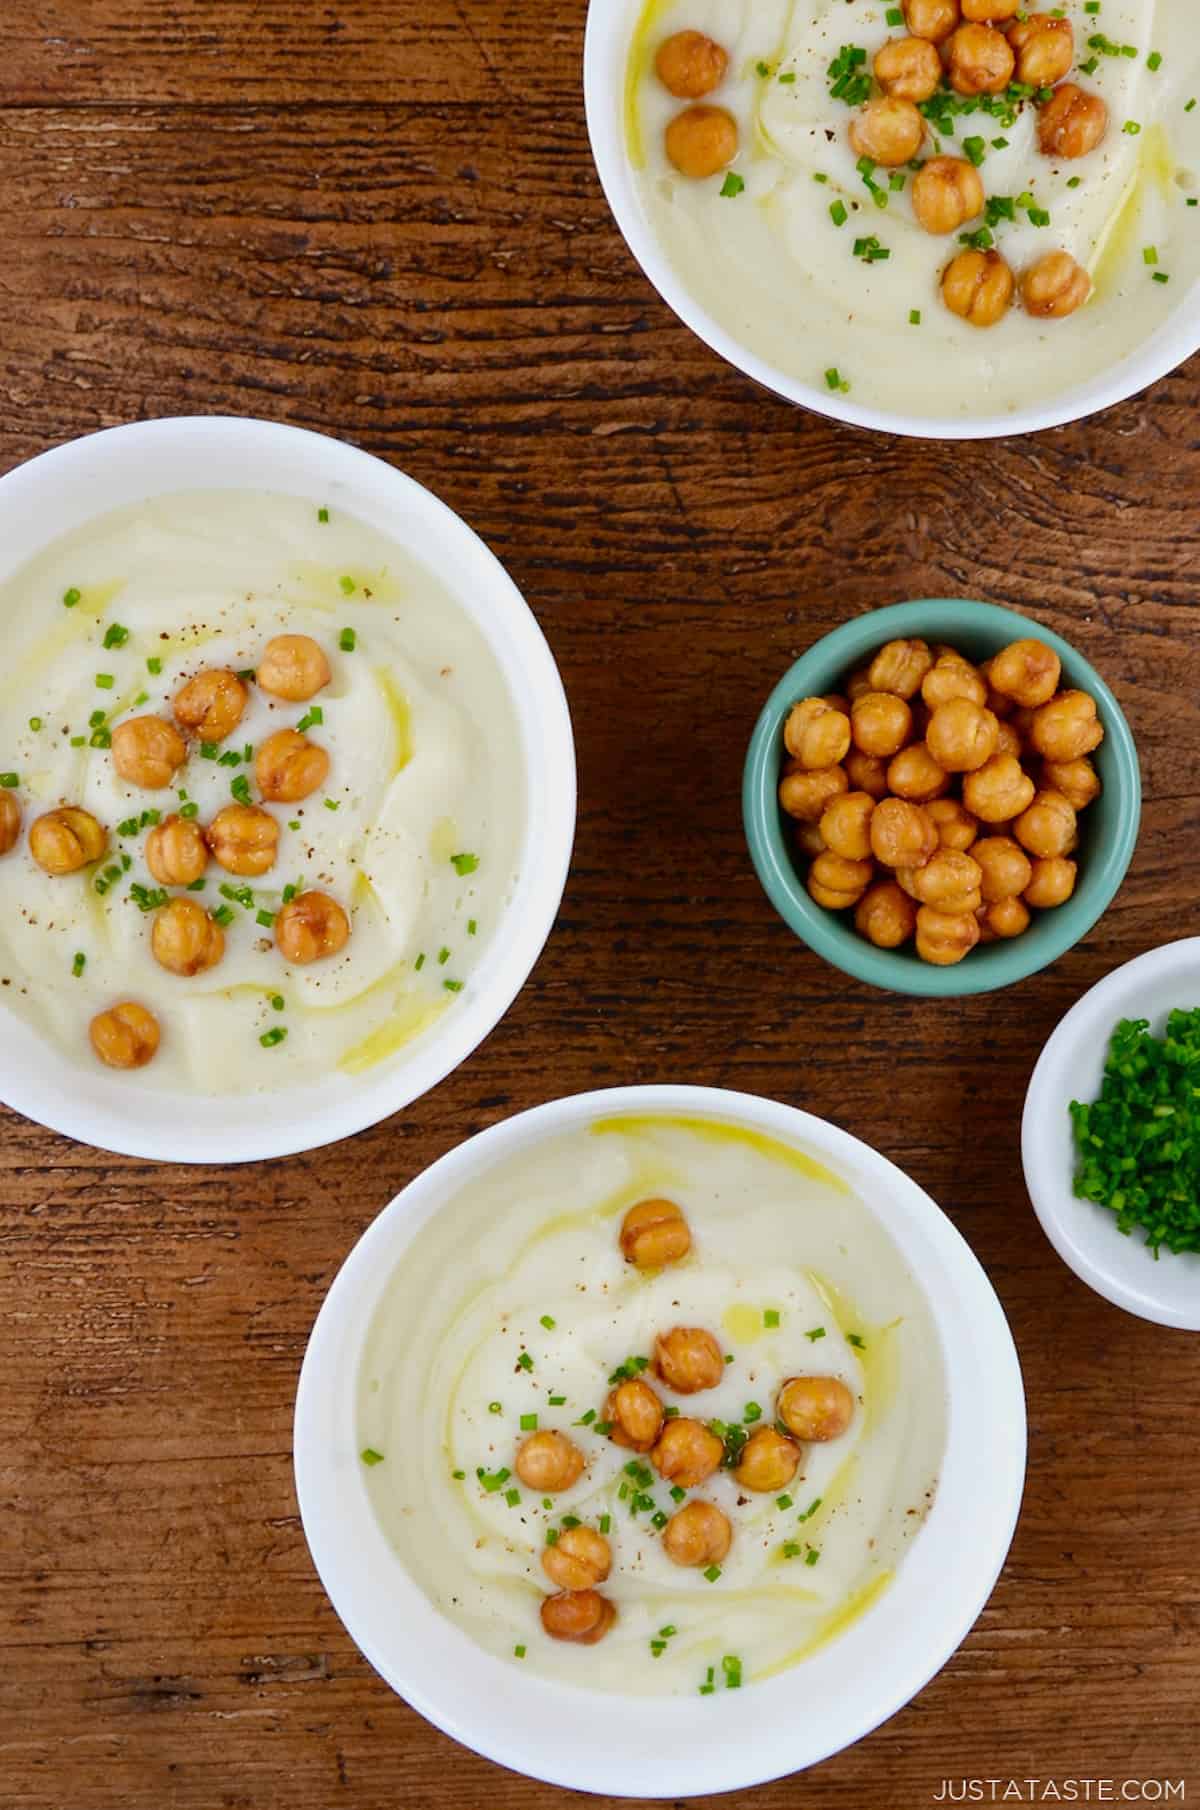 Three bowls of of cauliflower soup topped with crispy chickpeas, minced chives and olive oil. Small bowls of extra crispy chickpeas and minced chives are beside the soup bowls.